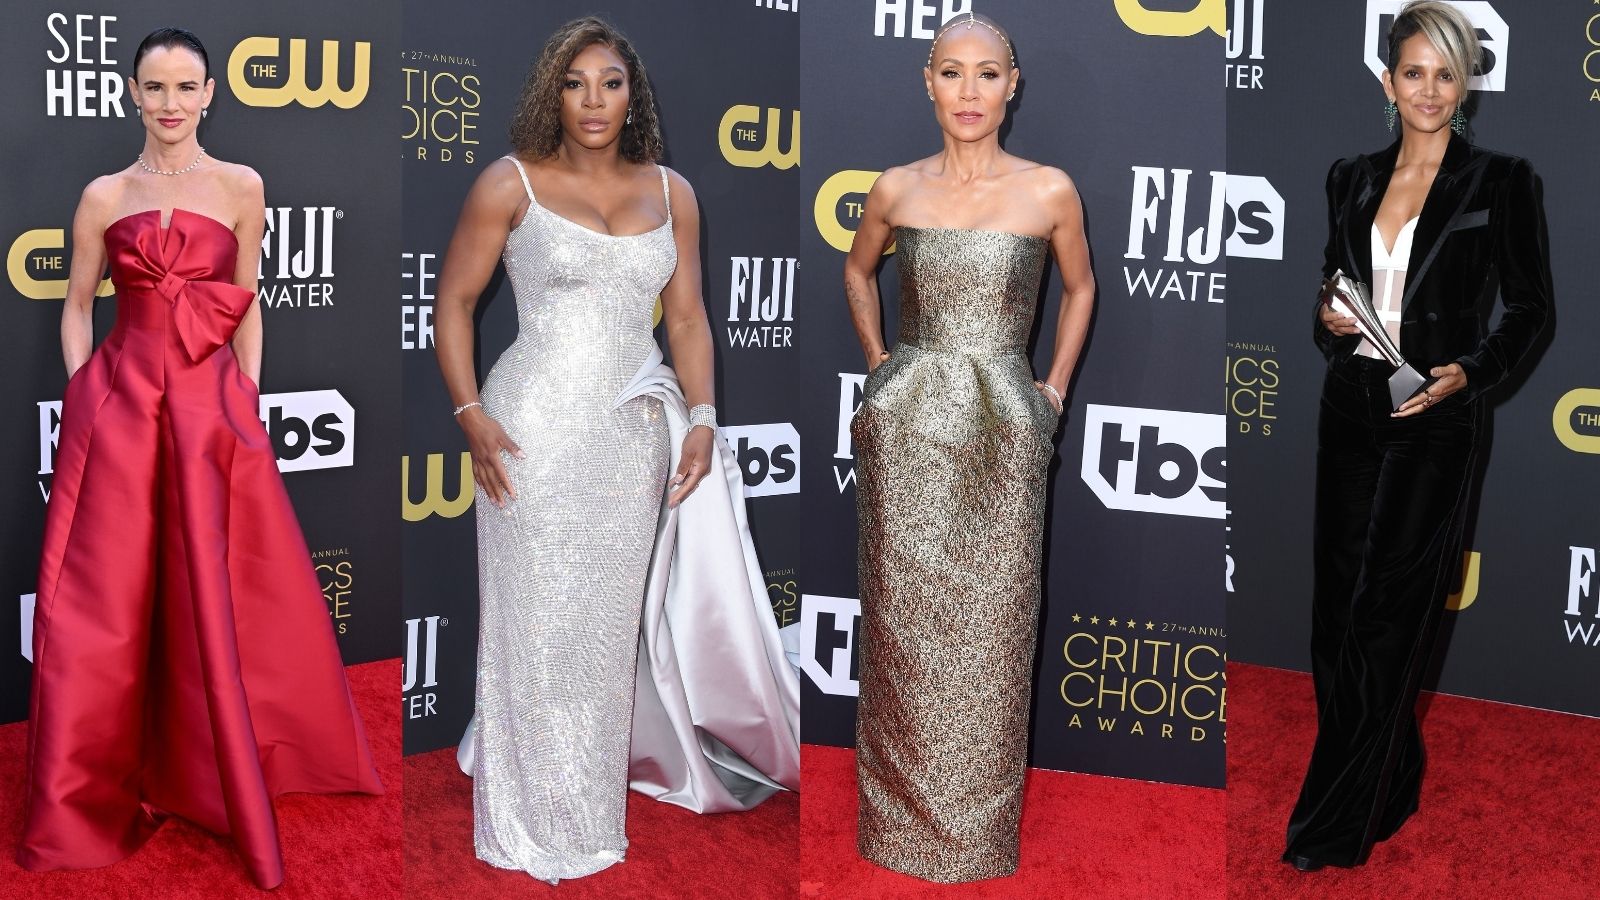 Critics' Choice Awards 2019: See all the best looks from the red carpet!